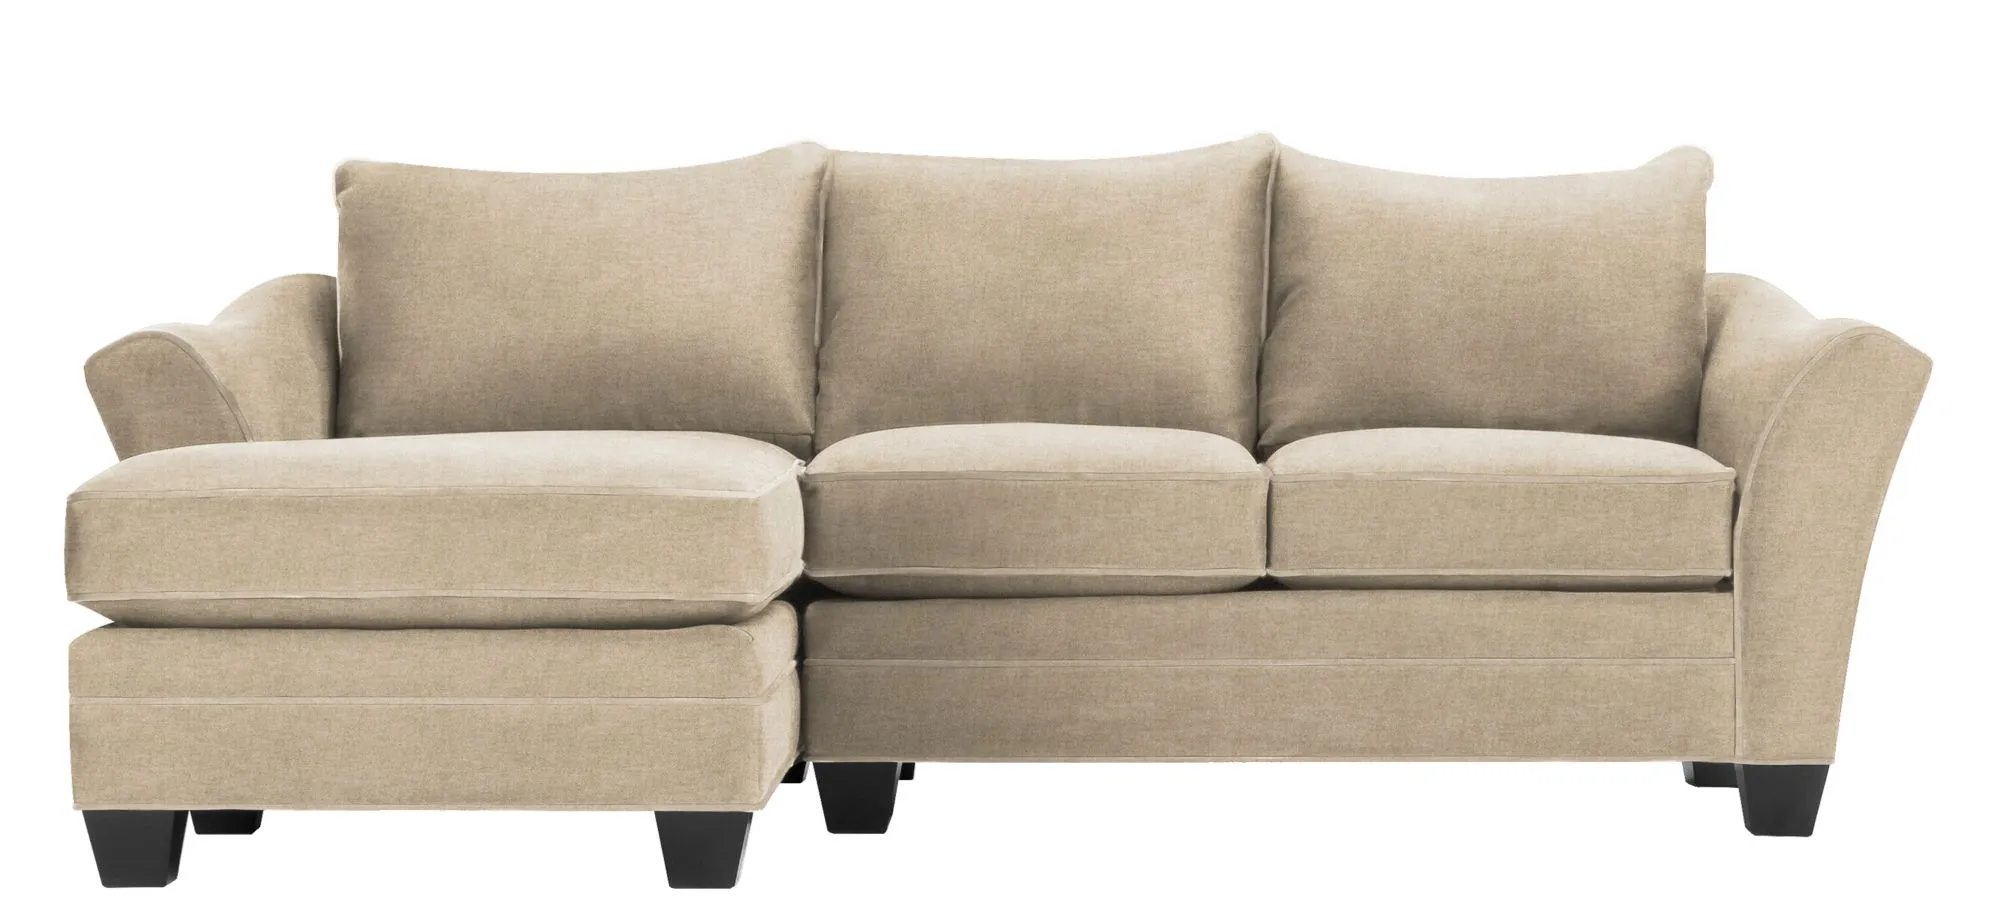 Foresthill 2-pc. Left Hand Chaise Sectional Sofa in Santa Rosa Linen by H.M. Richards